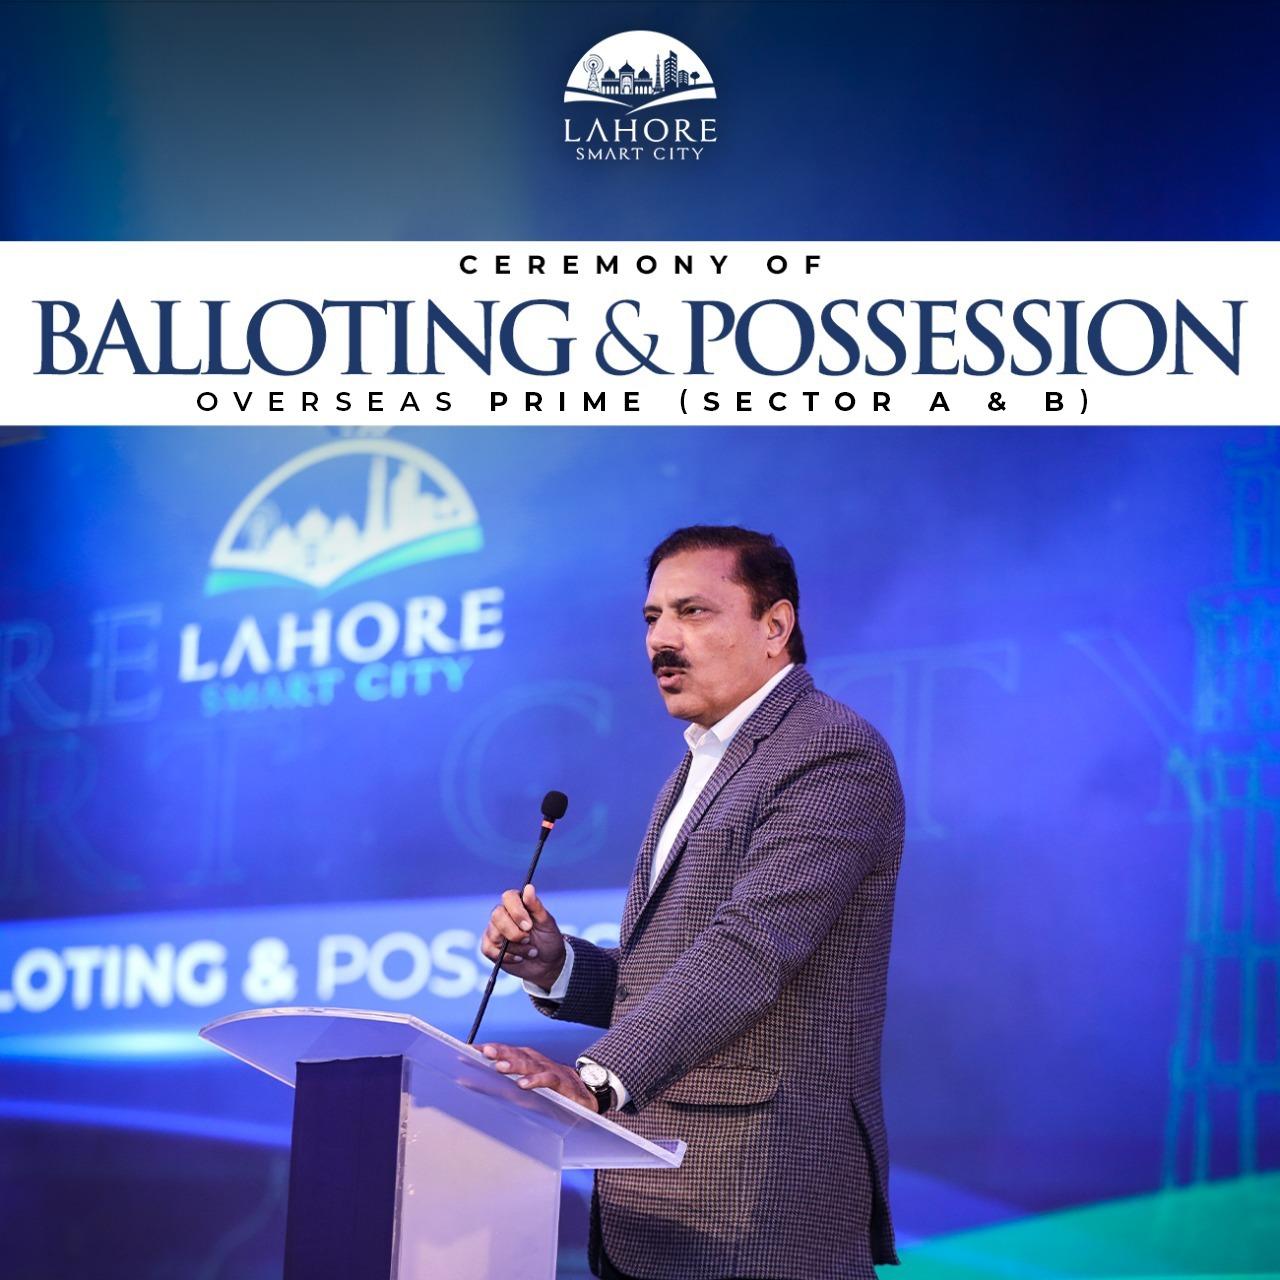 Ceremony of Balloting & Possession Overseas Prime (Sector A & B)